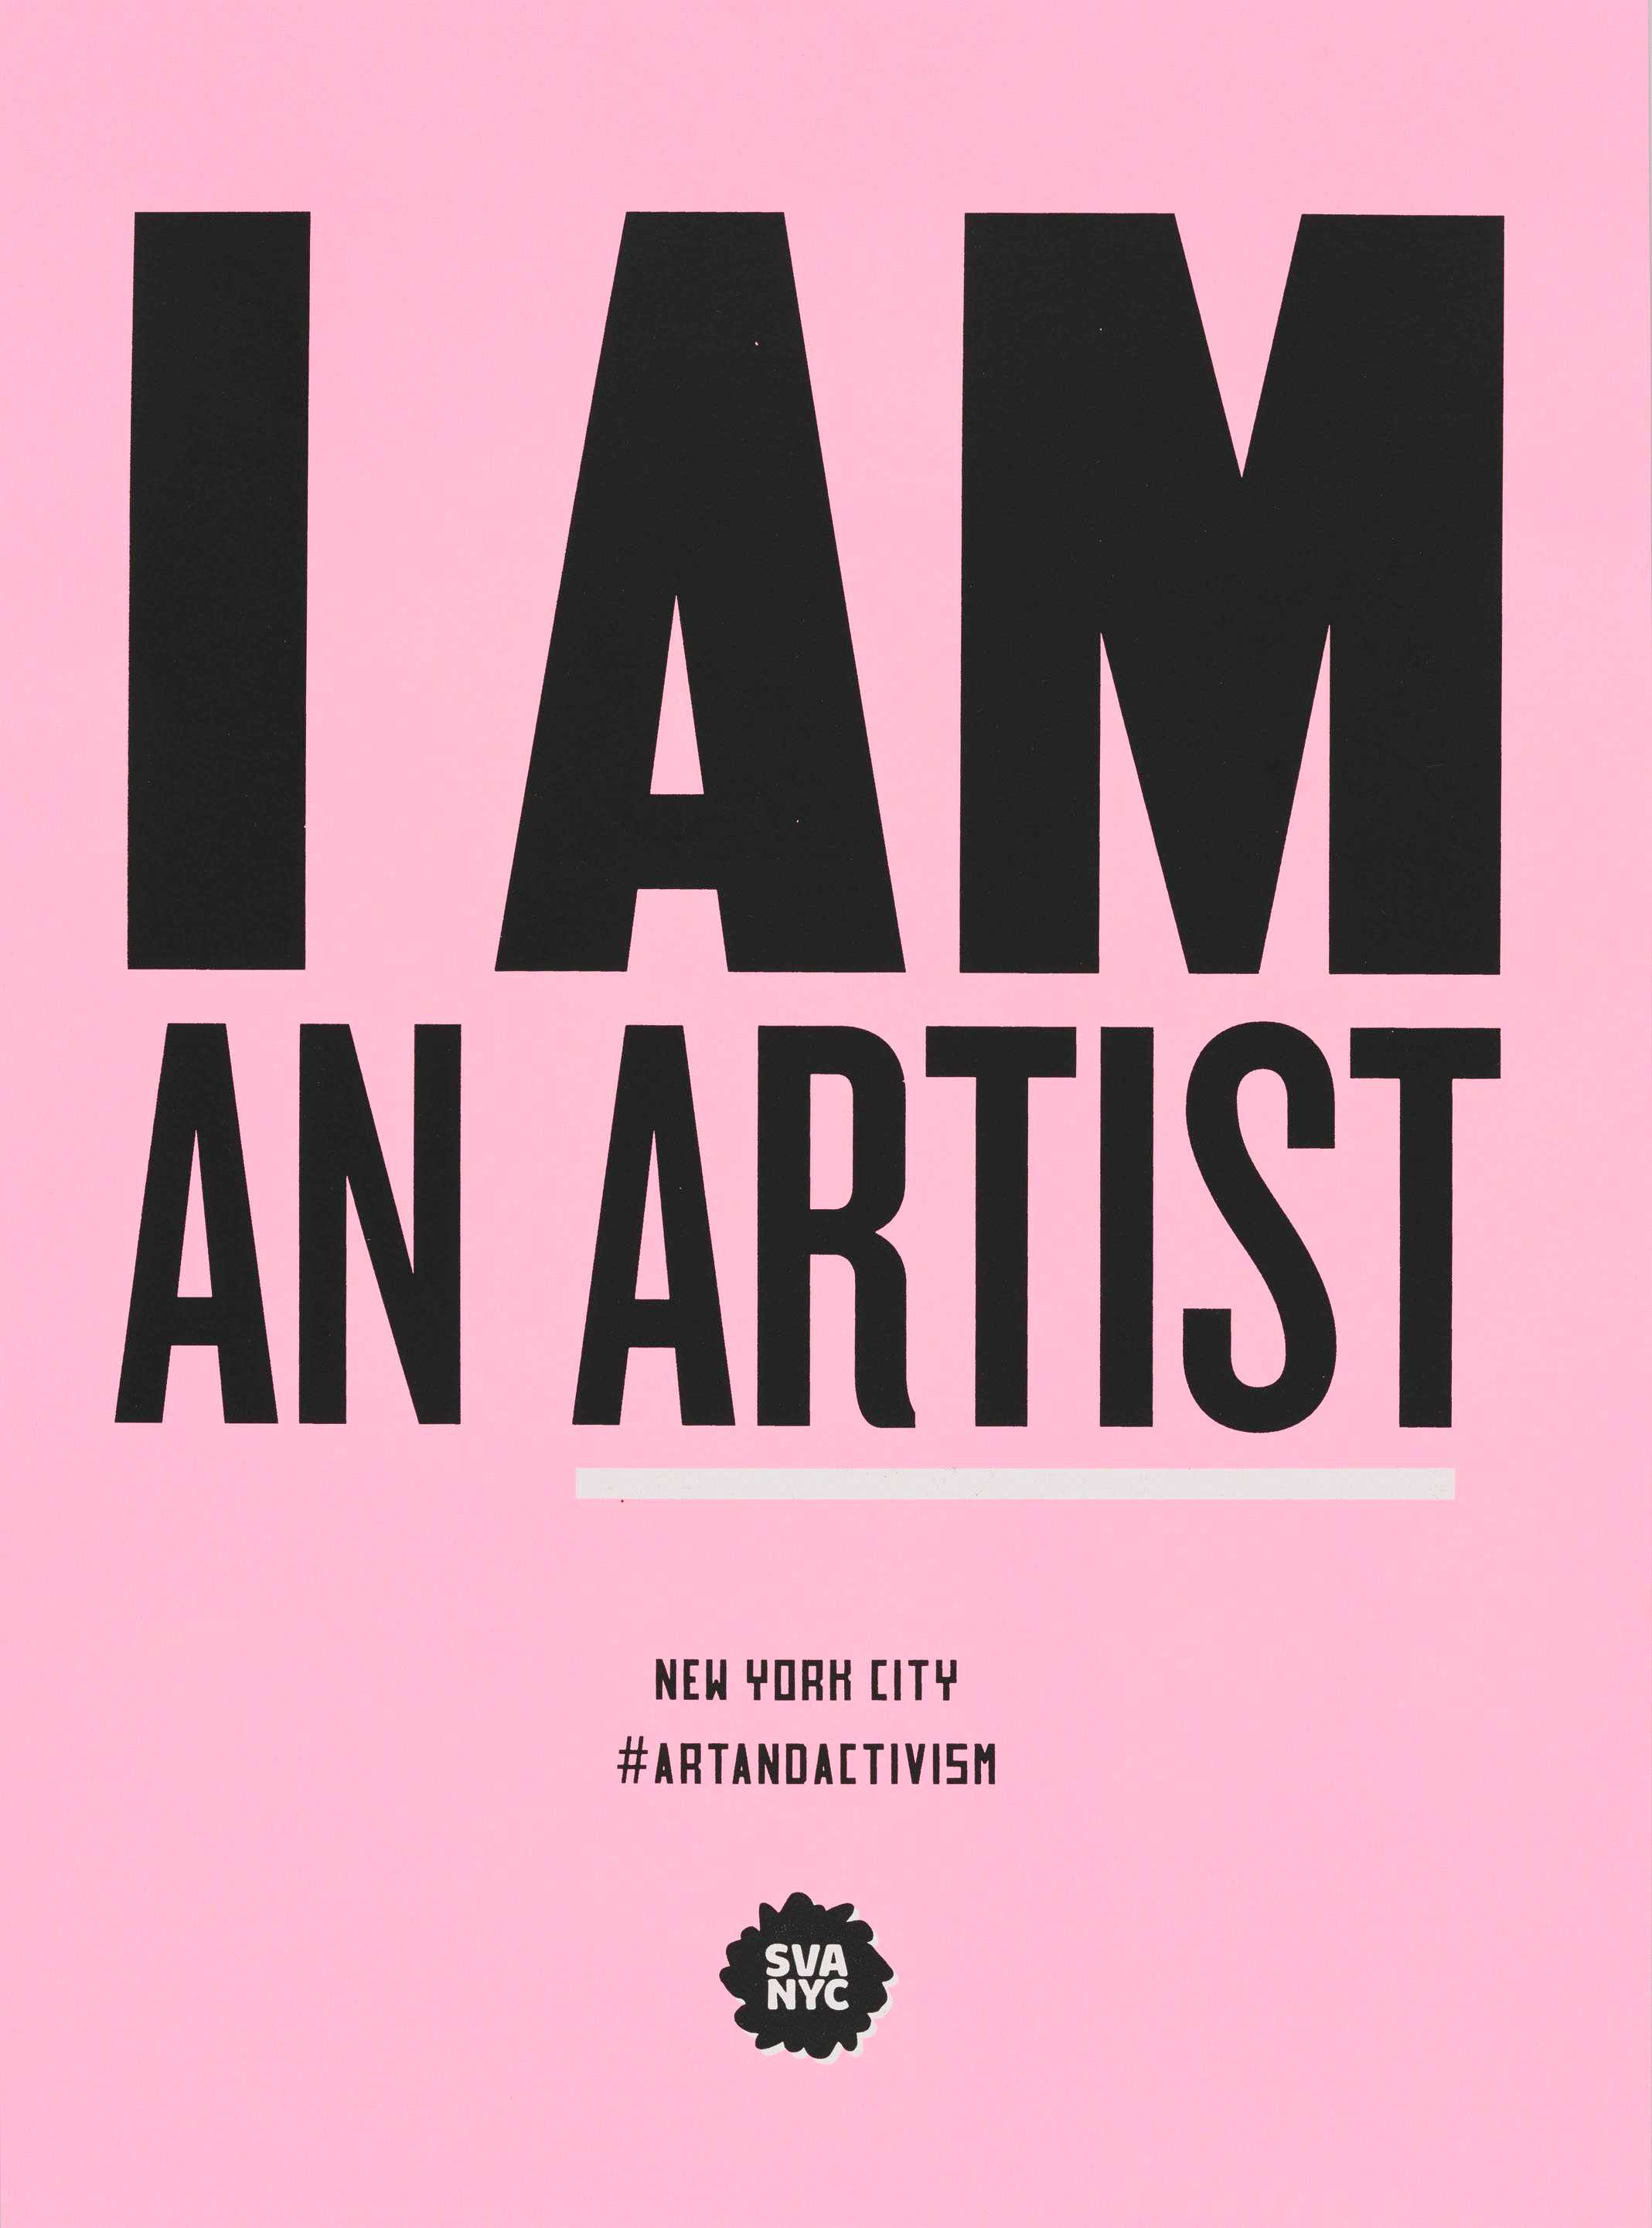 Rectangular poster with bright pink background with black text reading:  “I AM / AN ARTIST.”  Below in smaller text is  “NEW YORK CITY / # ARTANDACTIVISM.”